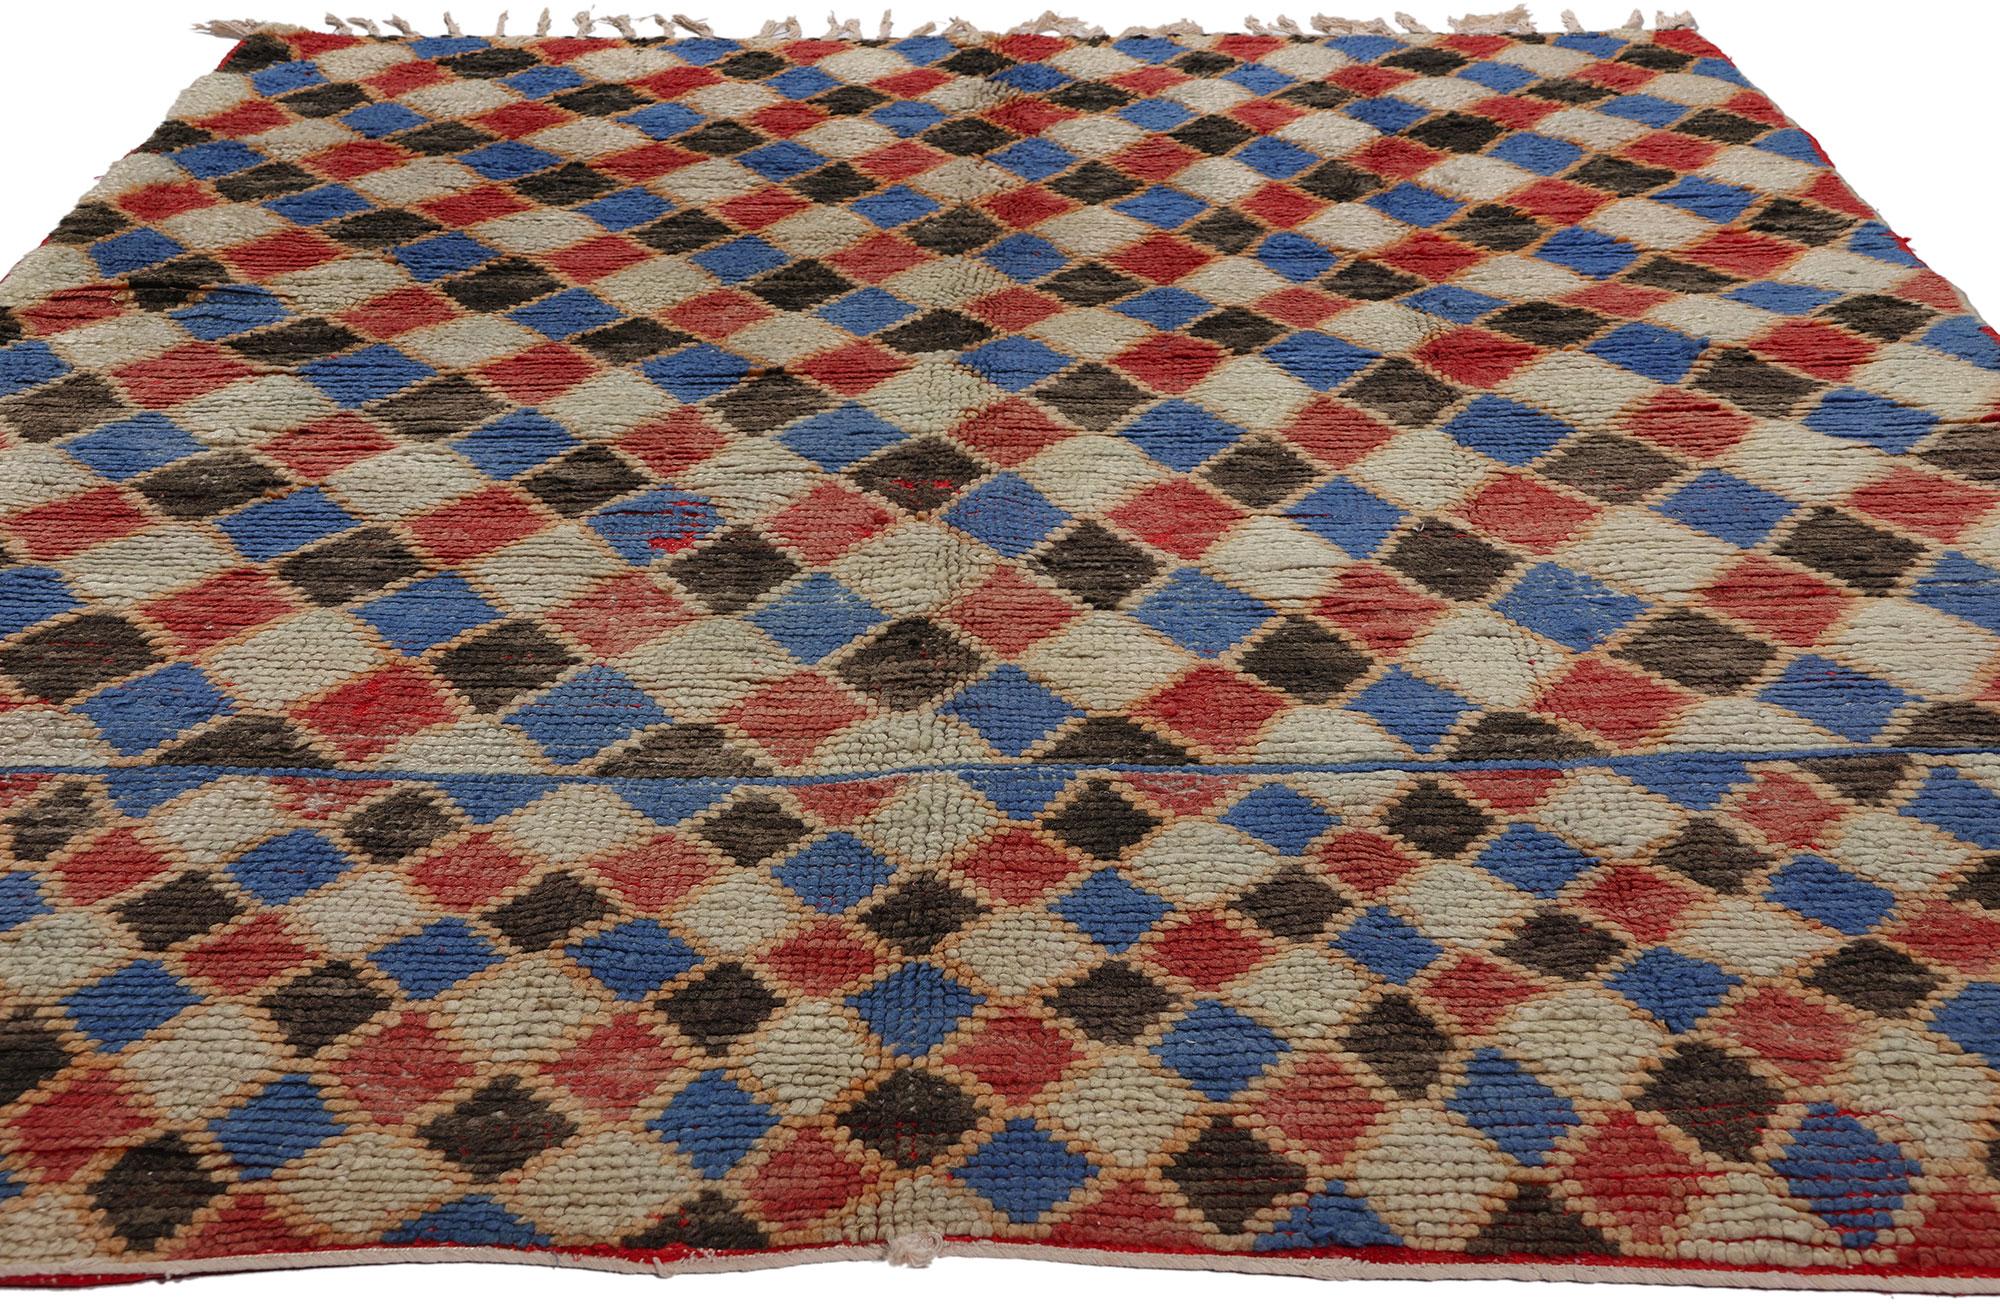 Tribal Vintage Harlequin Moroccan Azilal Rug, Maximalist Style Meets Nomadic Charm For Sale